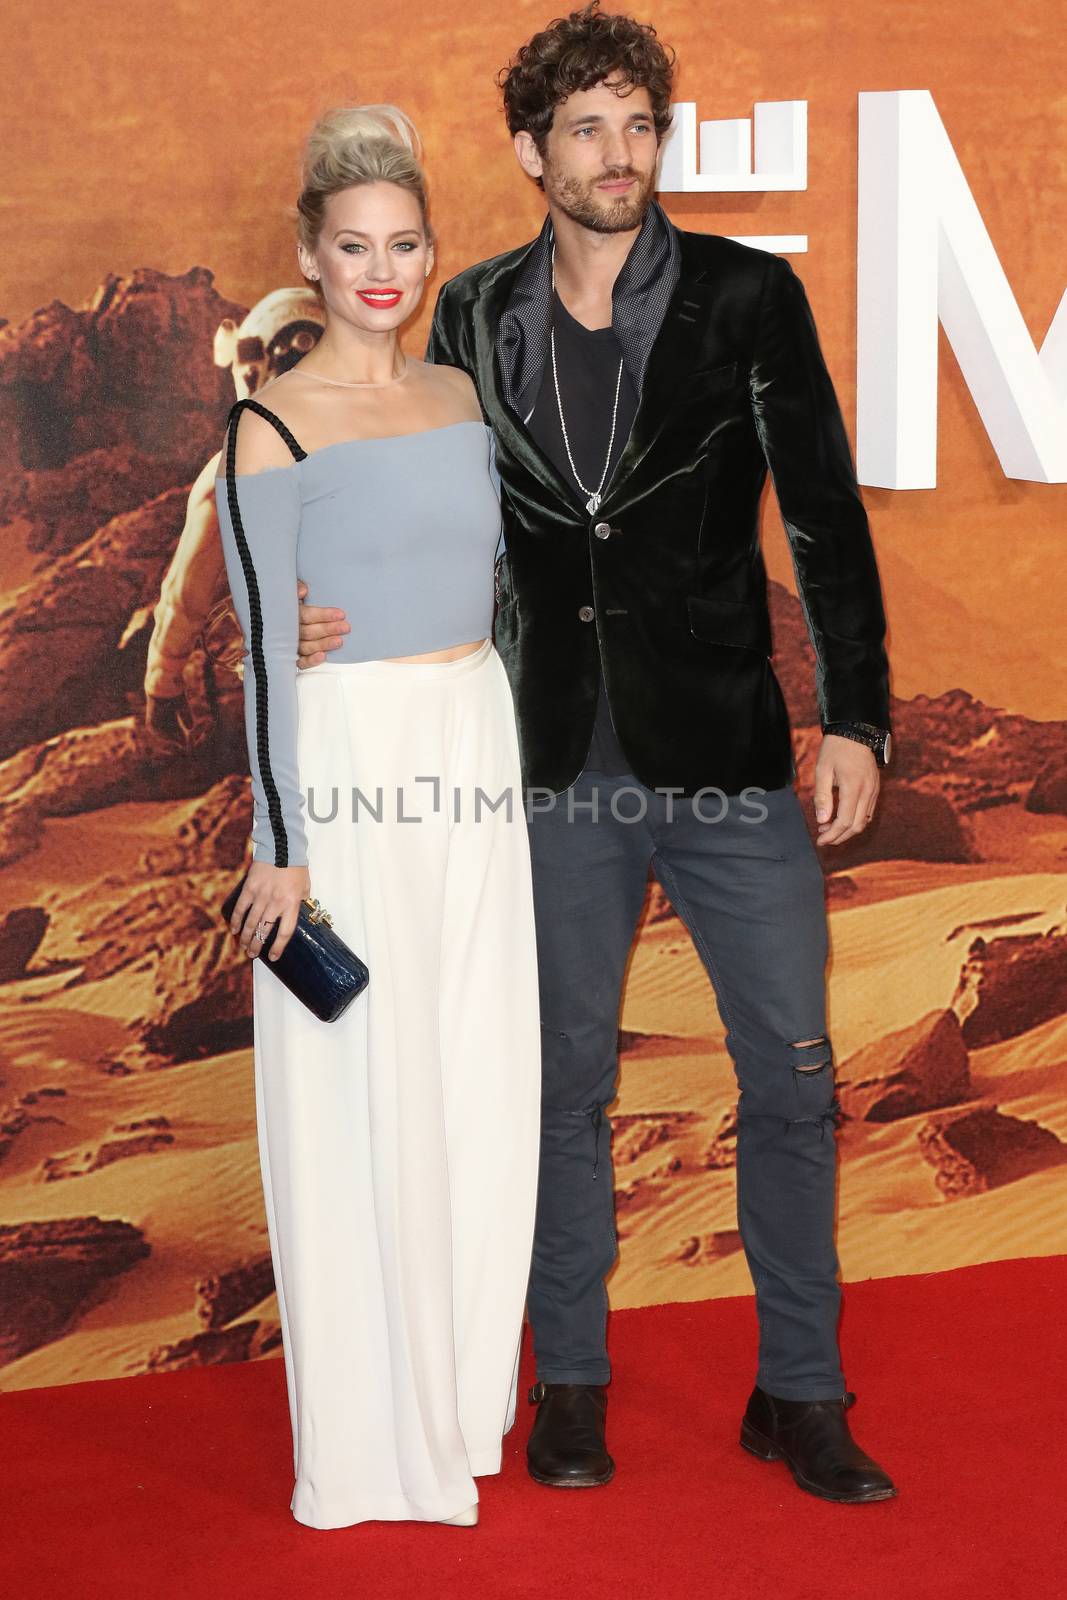 ENGLAND, London: Kimberly Wyatt and Max Rogers attend the European premiere of The Martian in Leicester Square in London, UK on September 24, 2015